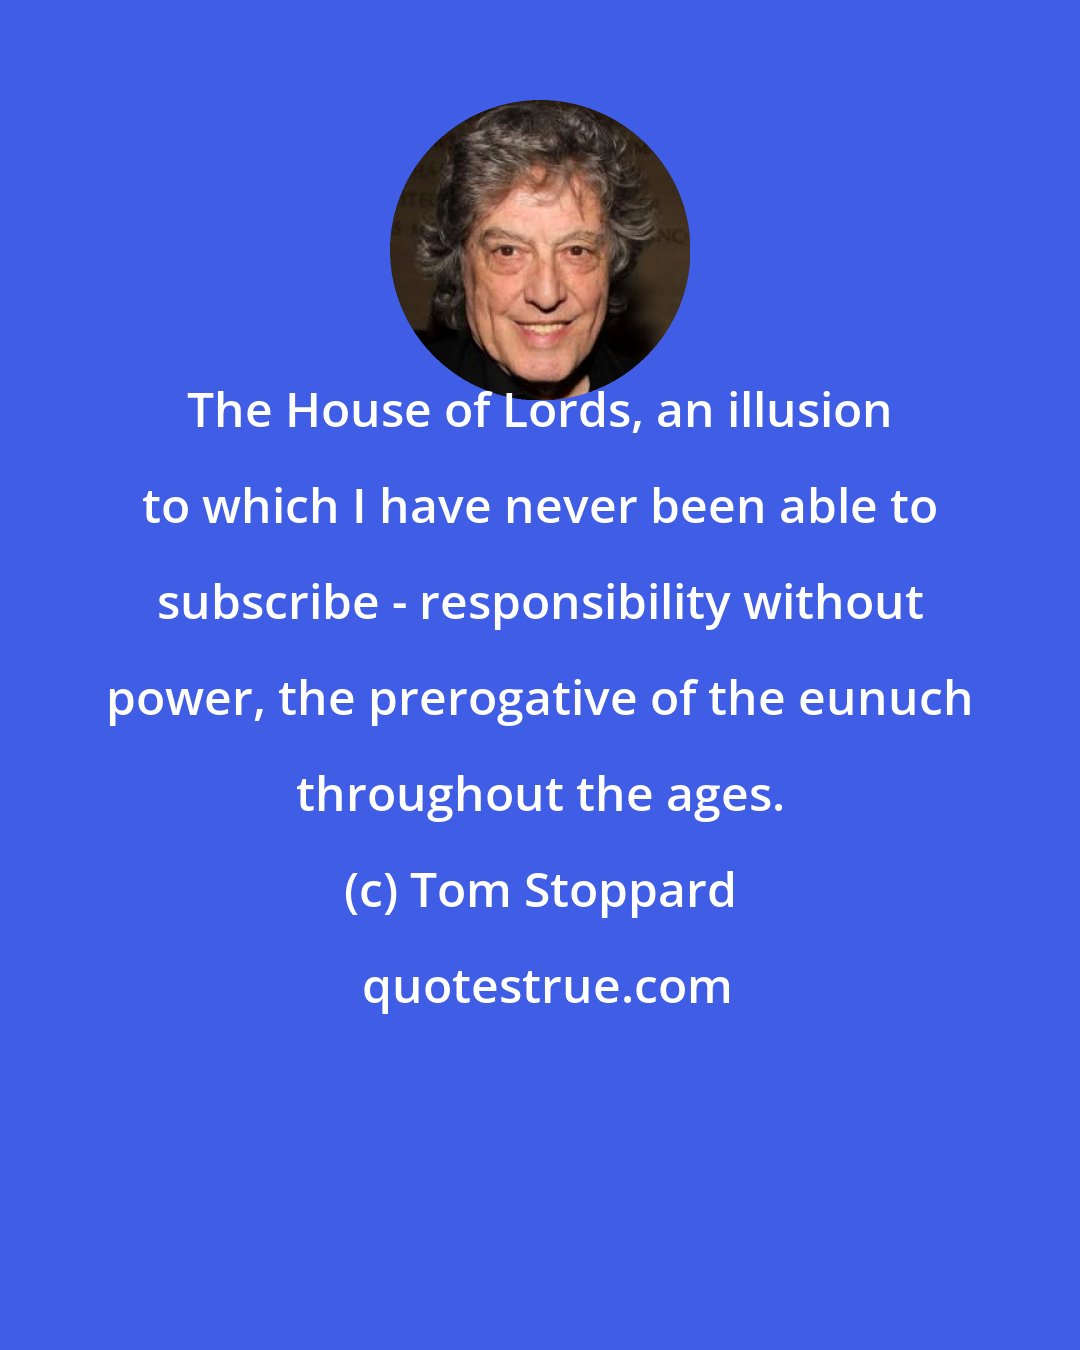 Tom Stoppard: The House of Lords, an illusion to which I have never been able to subscribe - responsibility without power, the prerogative of the eunuch throughout the ages.